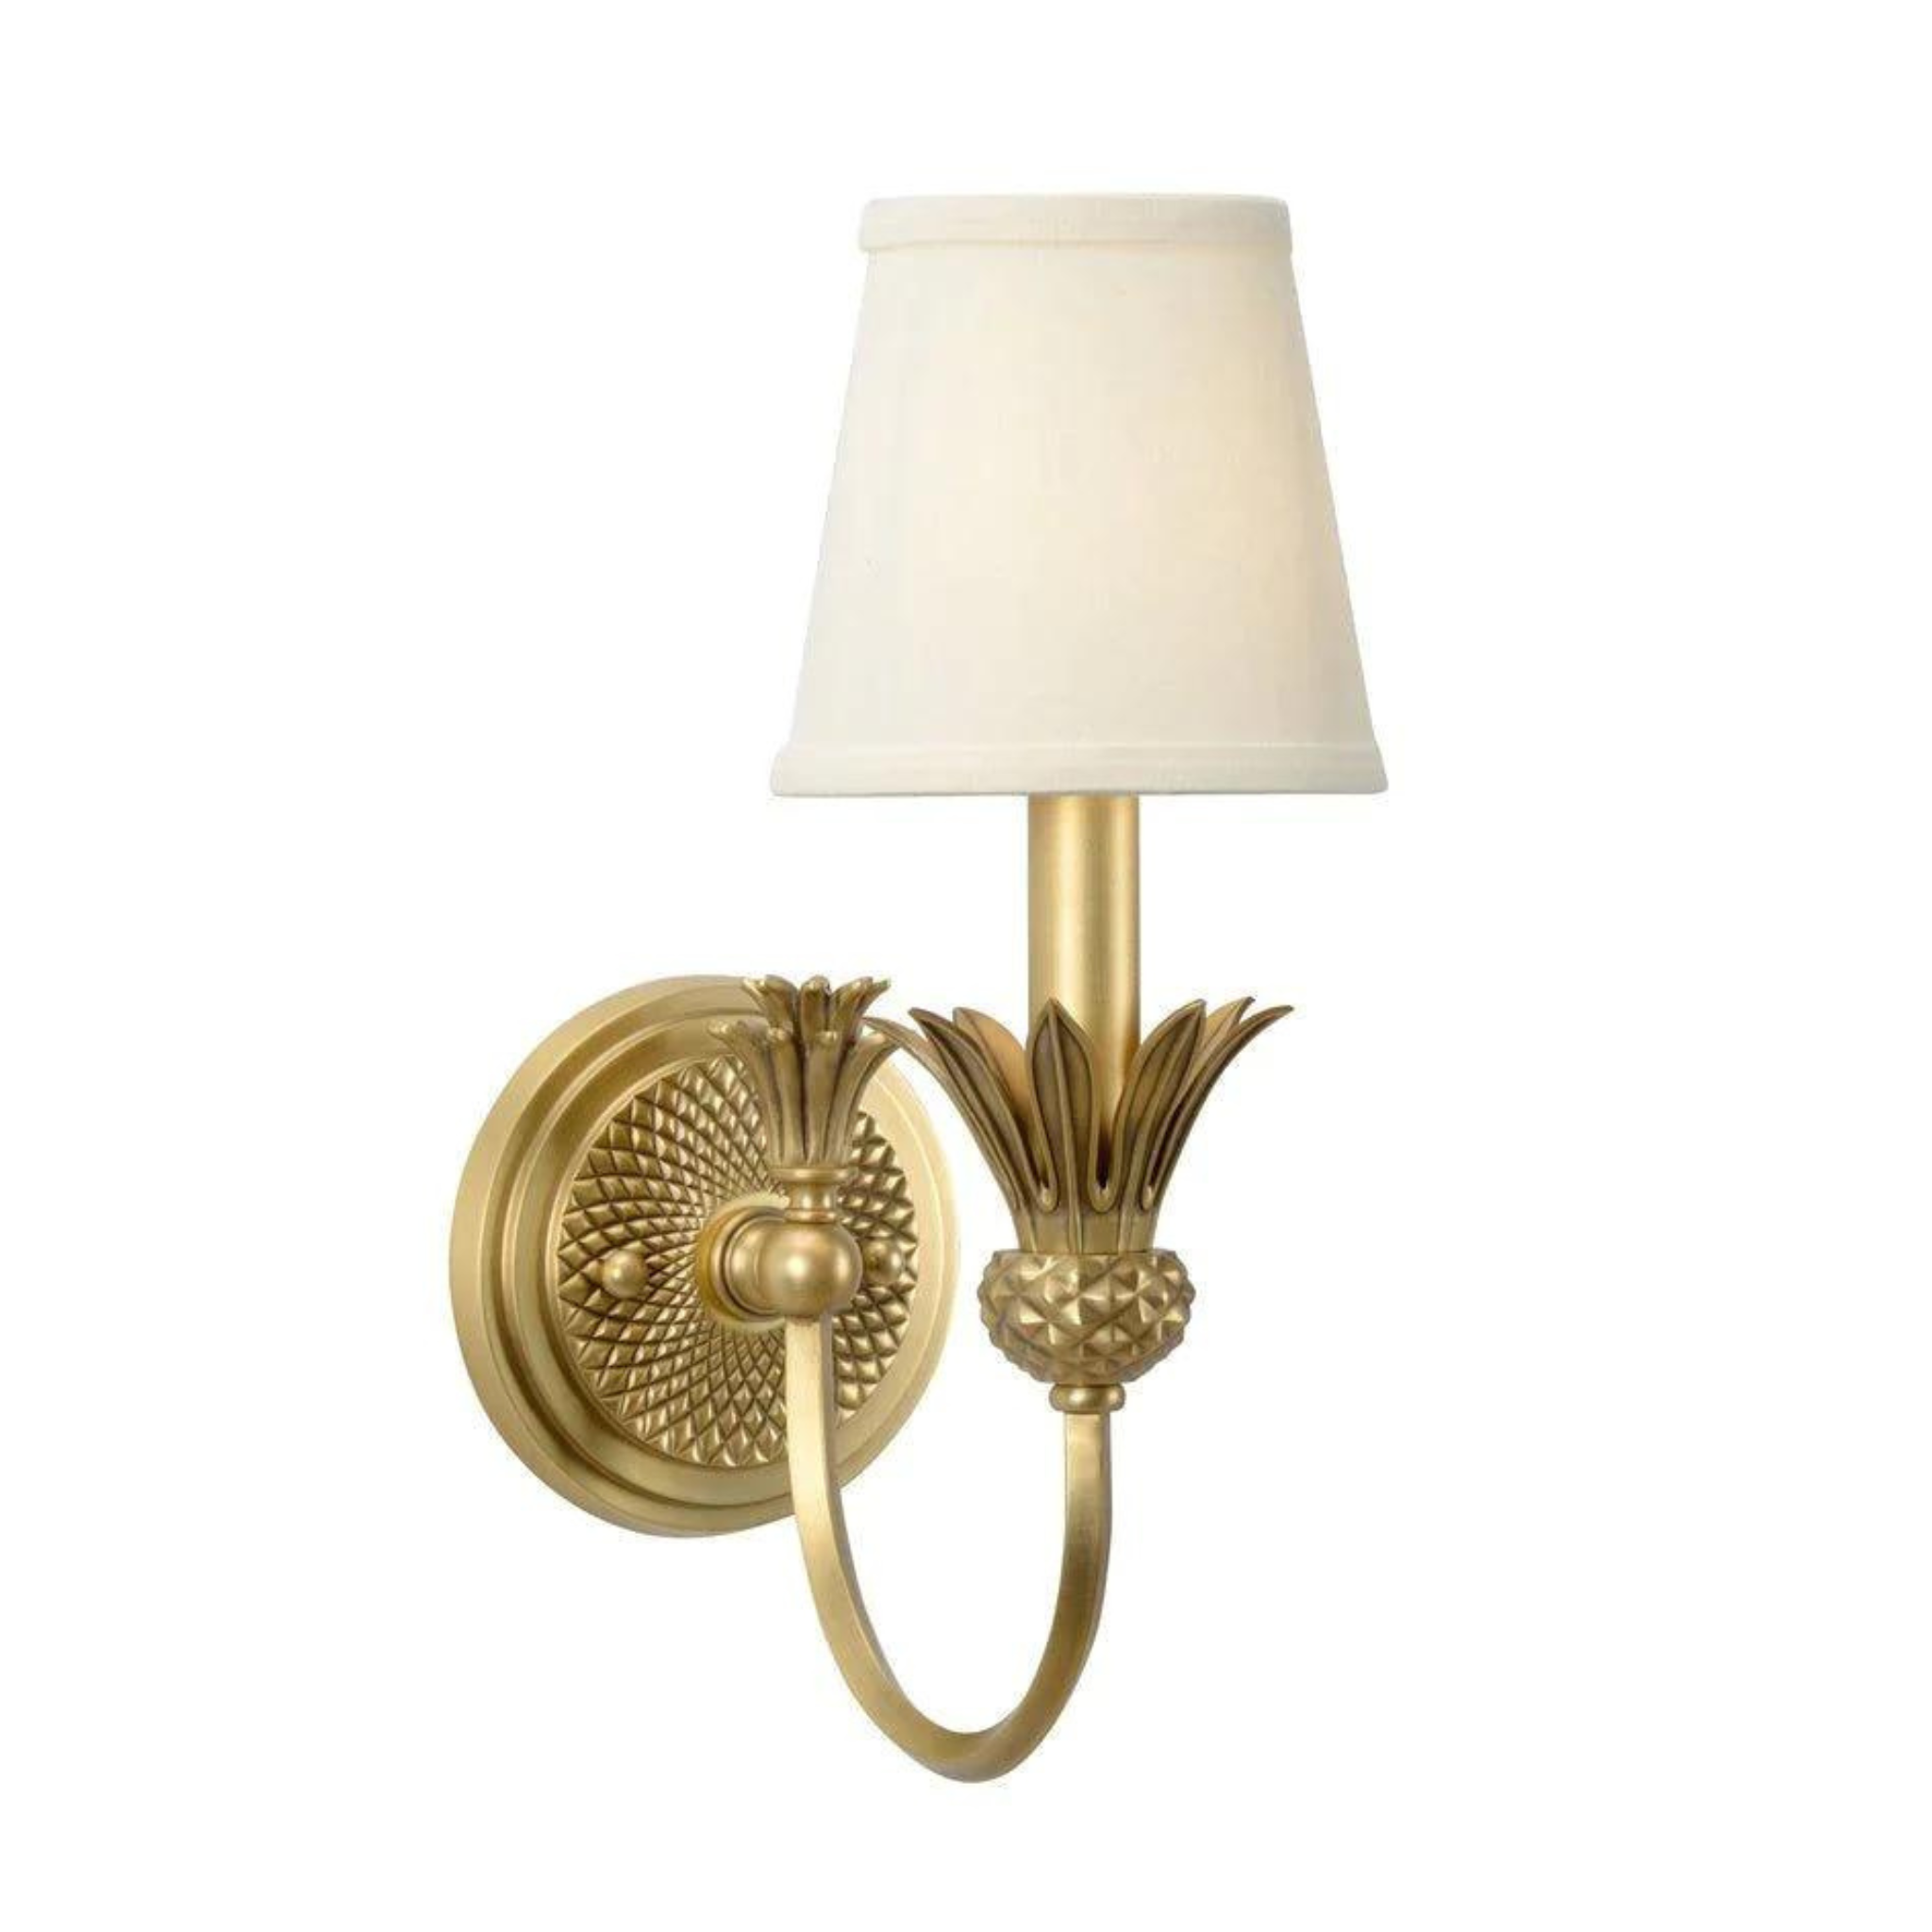 Traditional Antique Brass Wall Sconce With Off White Shade